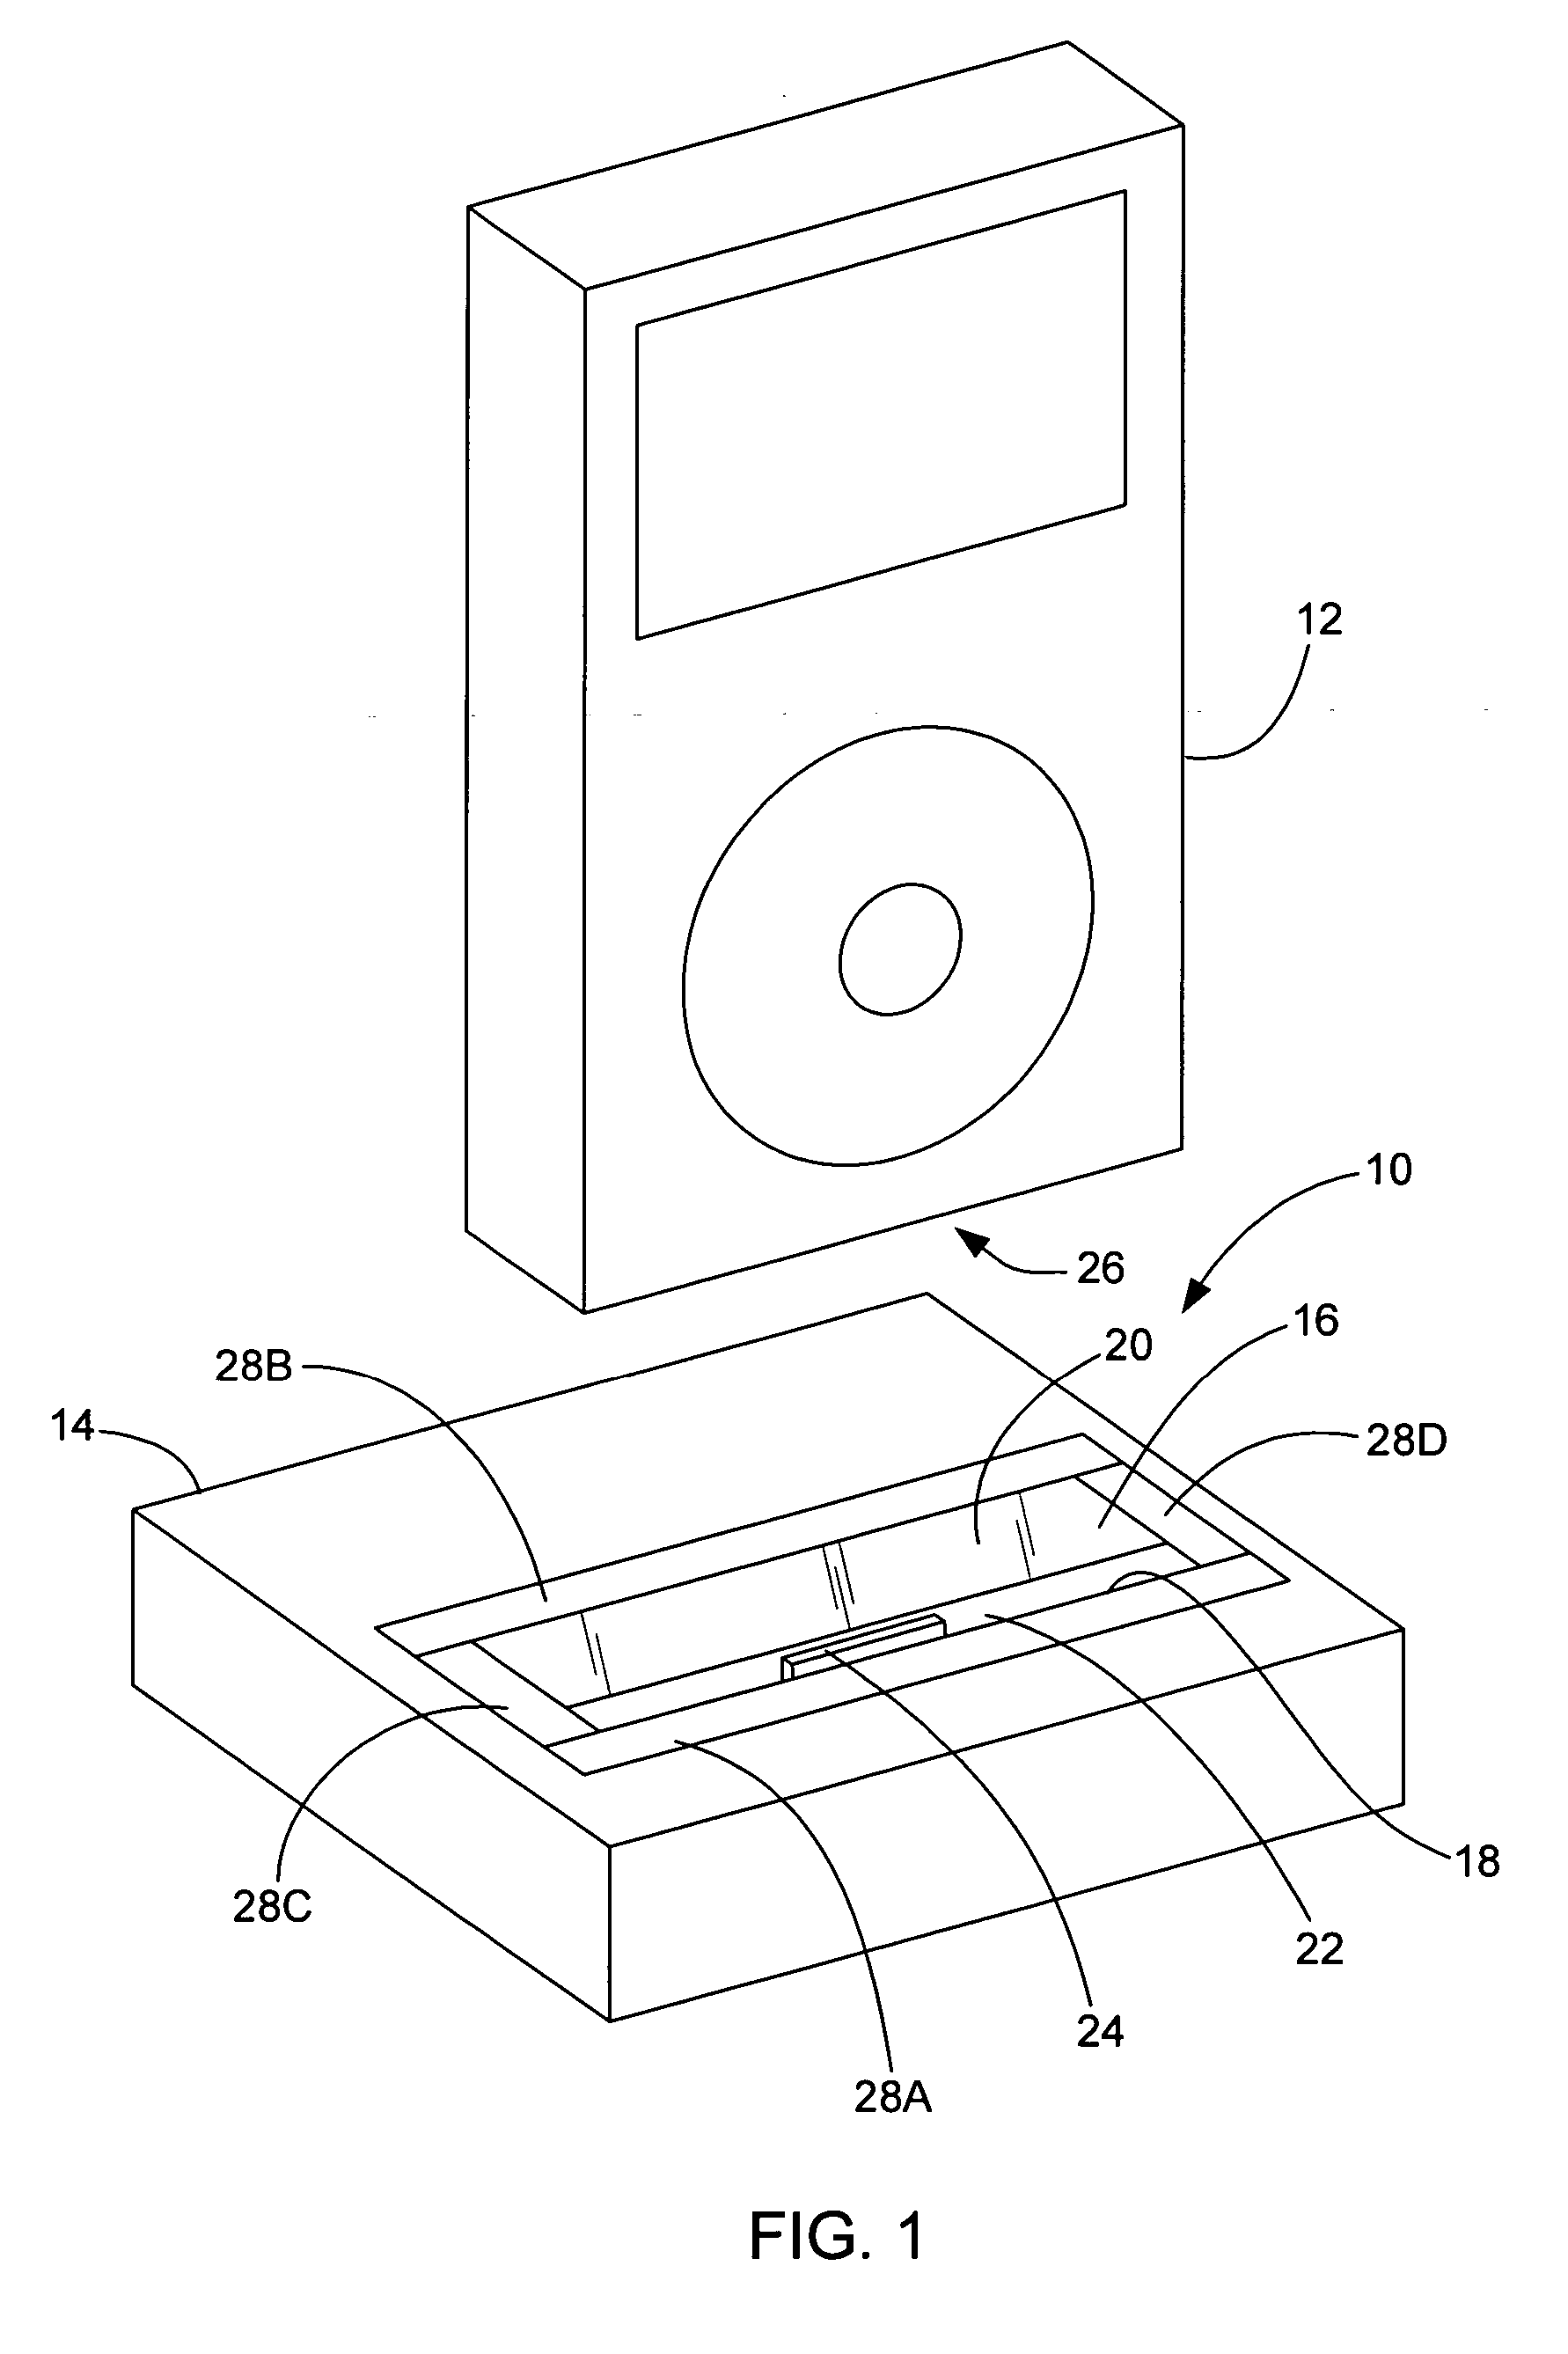 Universal docking station for hand held electronic devices